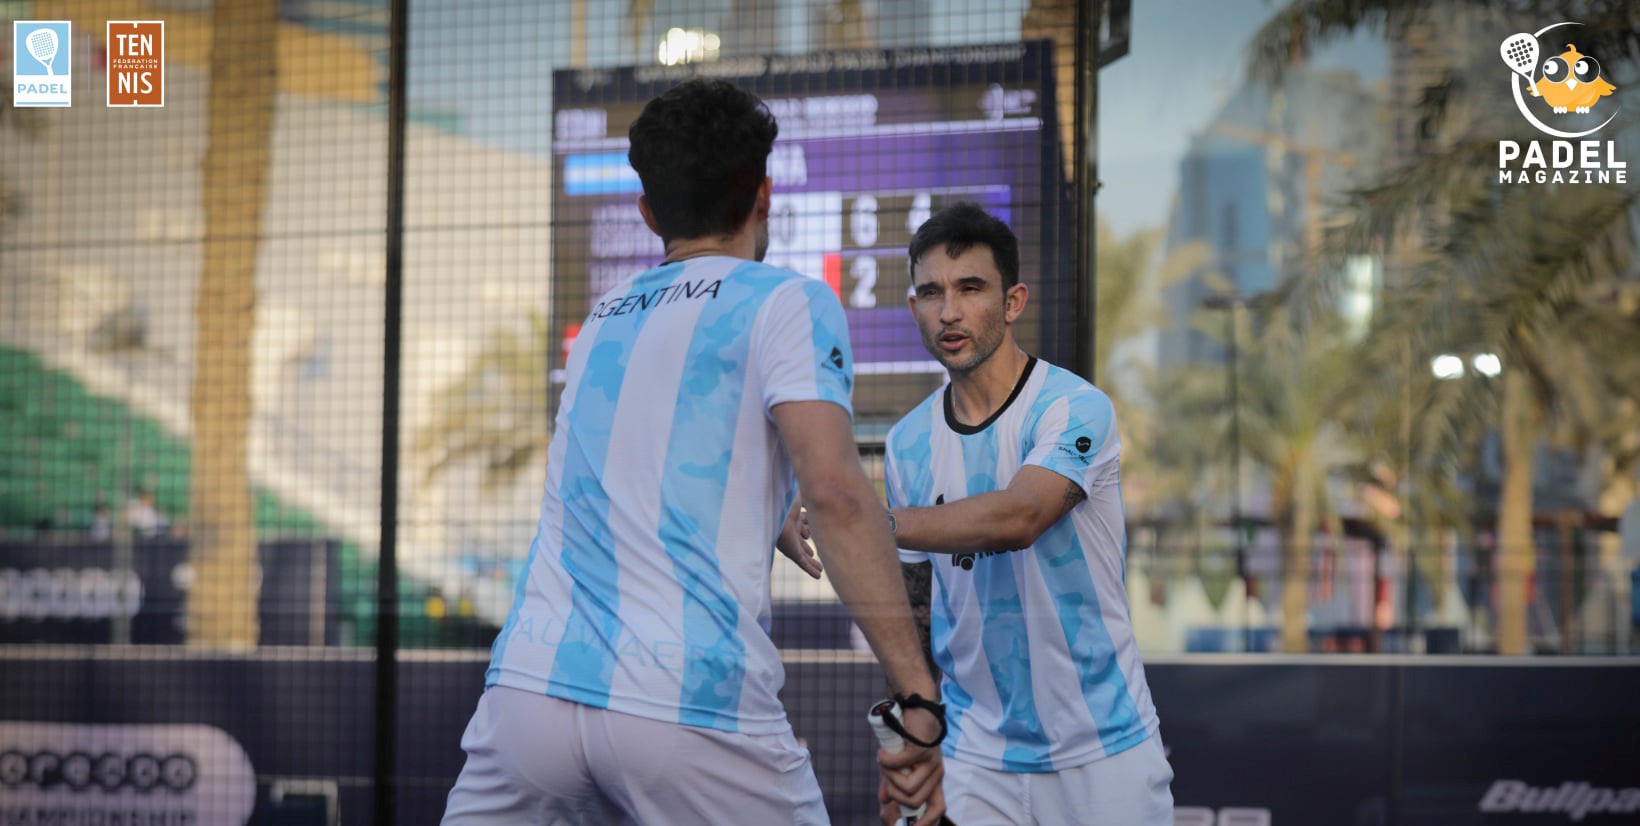 Premier Padel : only one stop in Argentina, normal?